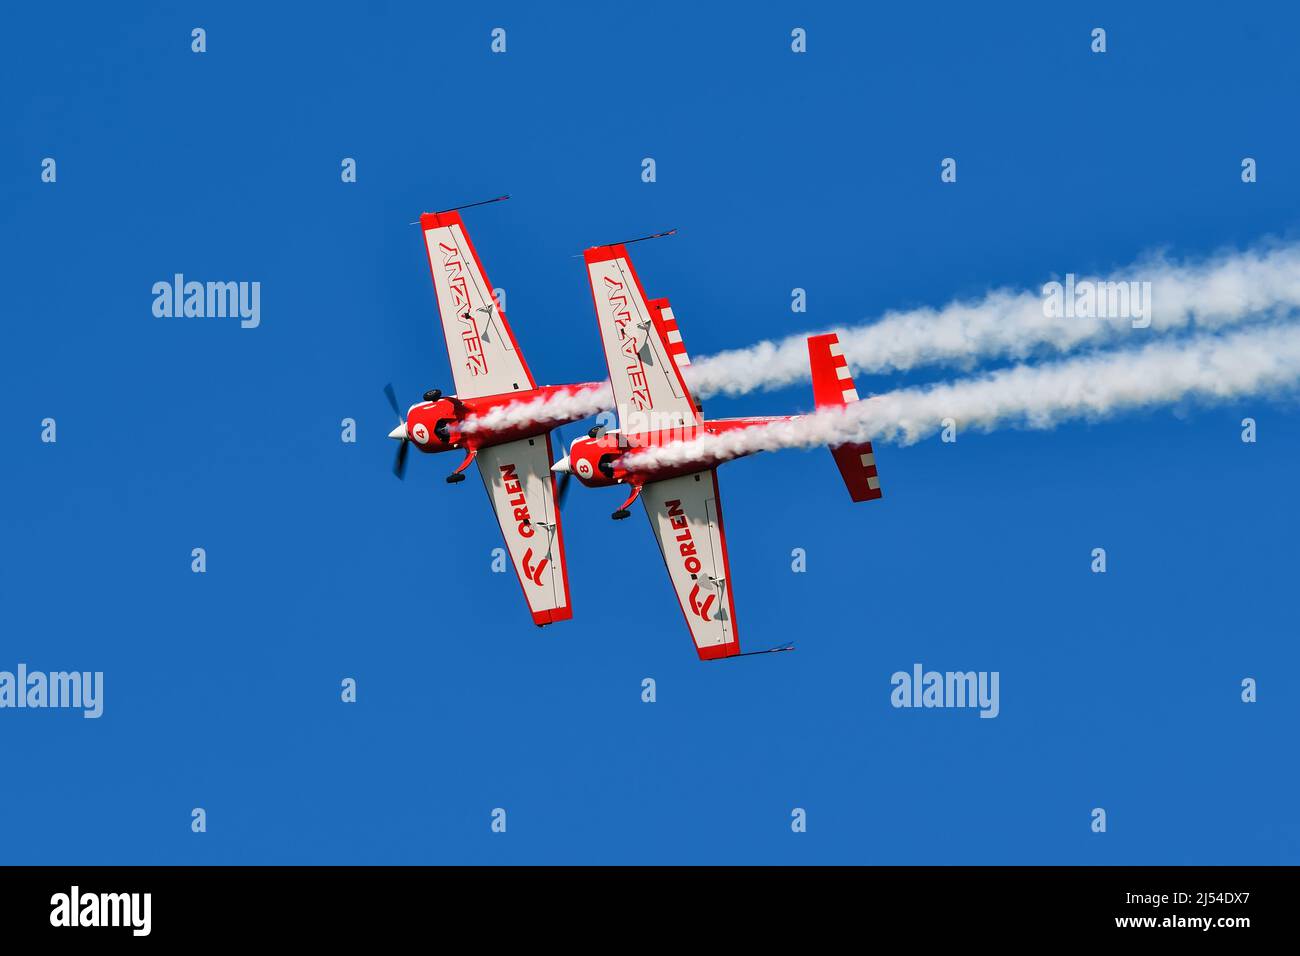 Gdynia, Poland - August 21, 2021: Zelazany aerobatic group at the Aero Baltic show in Gdynia, Poland. Stock Photo